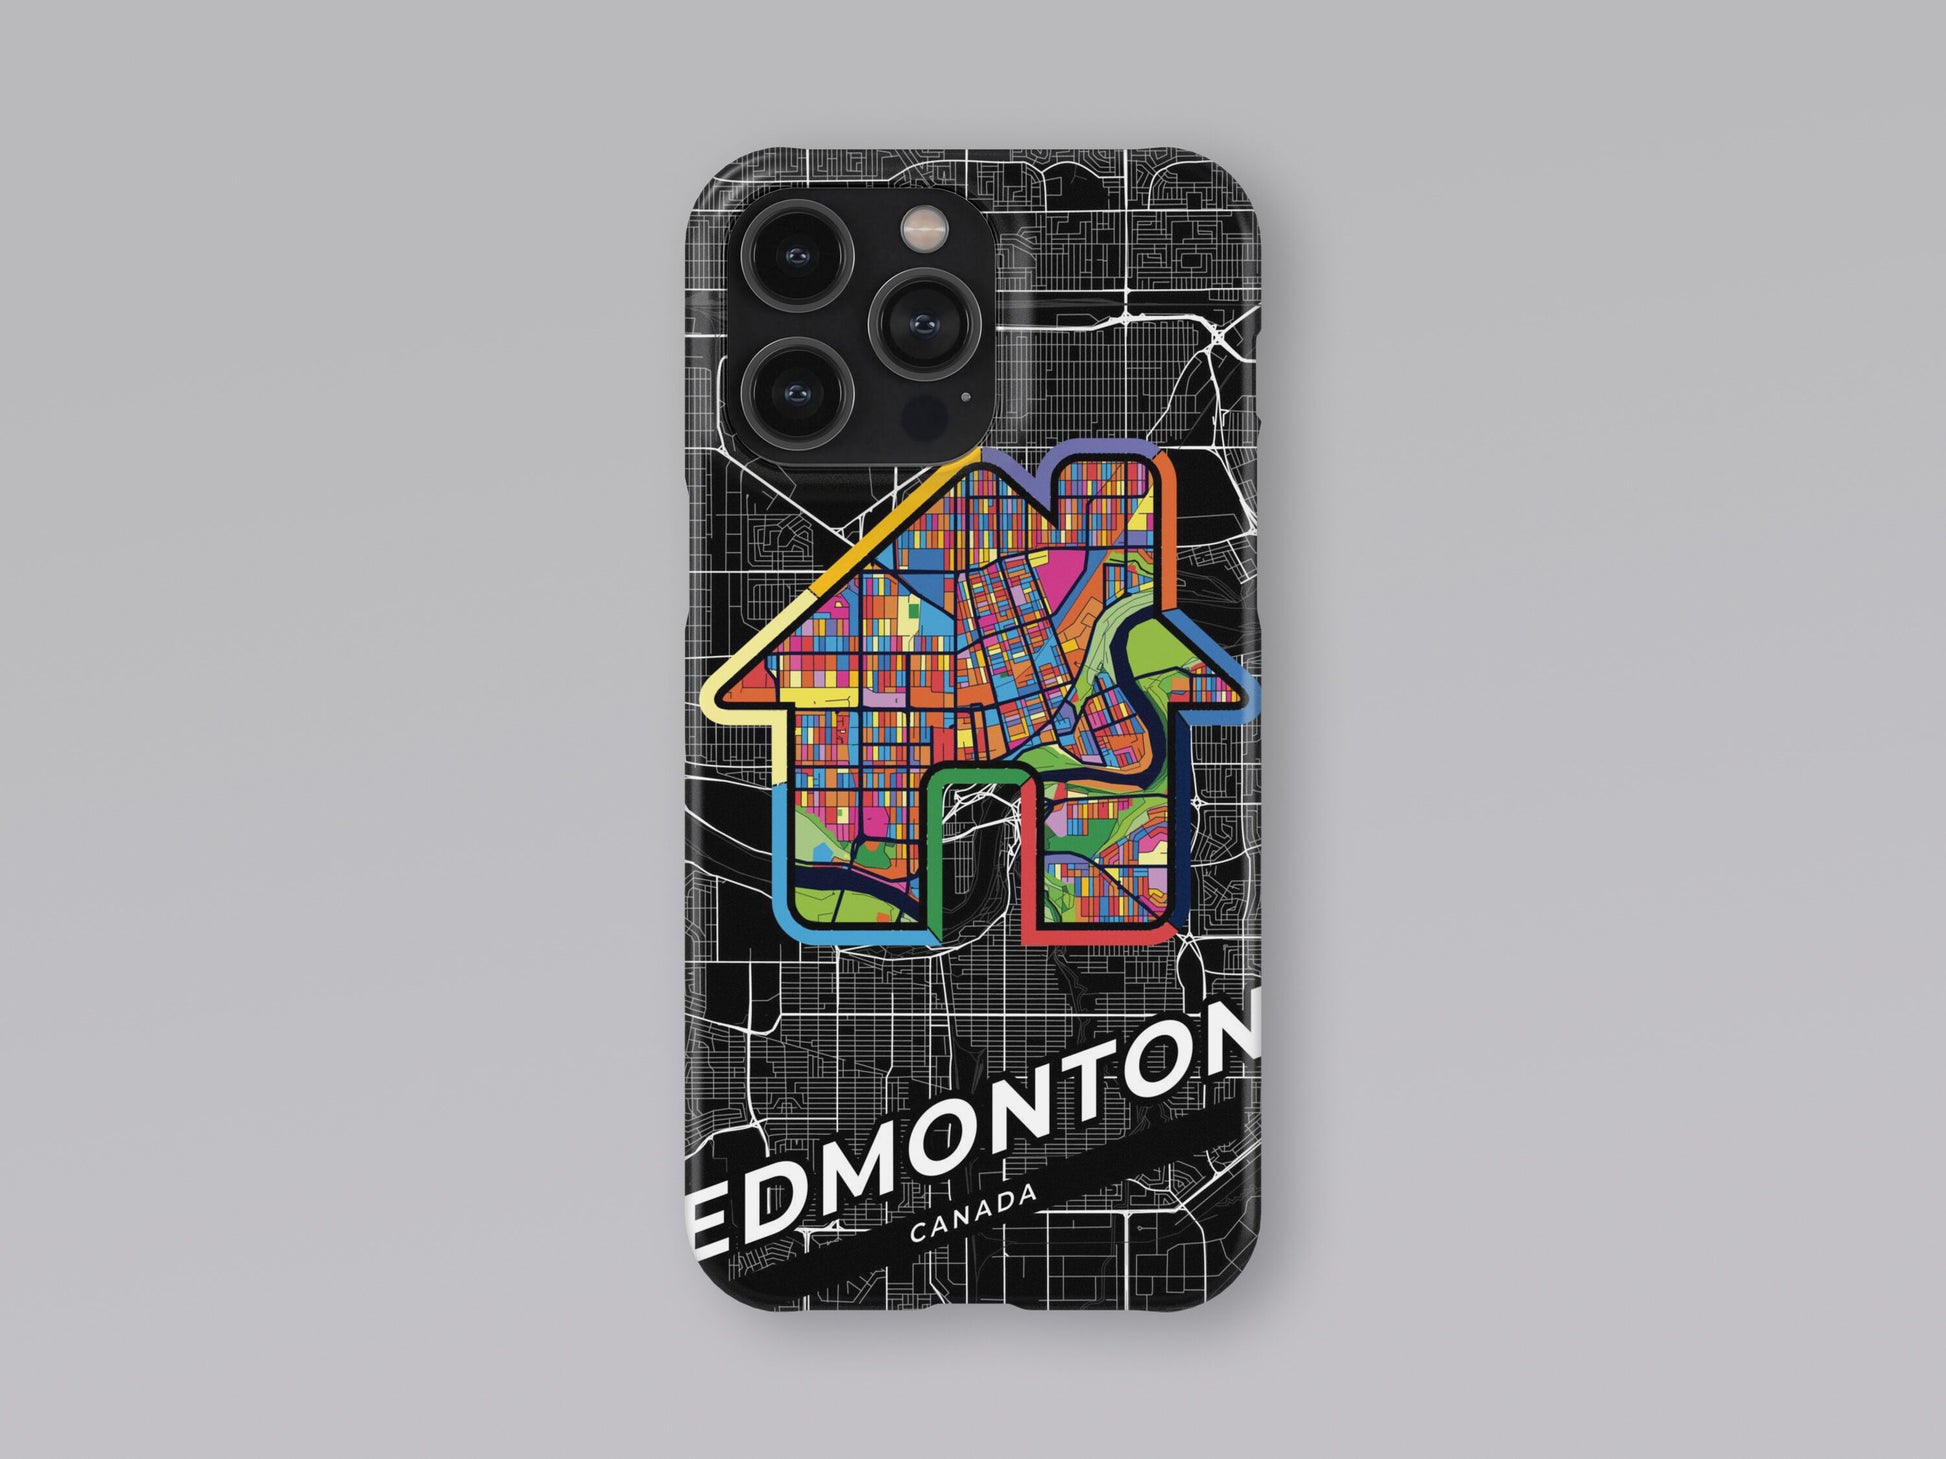 Edmonton Canada slim phone case with colorful icon. Birthday, wedding or housewarming gift. Couple match cases. 3